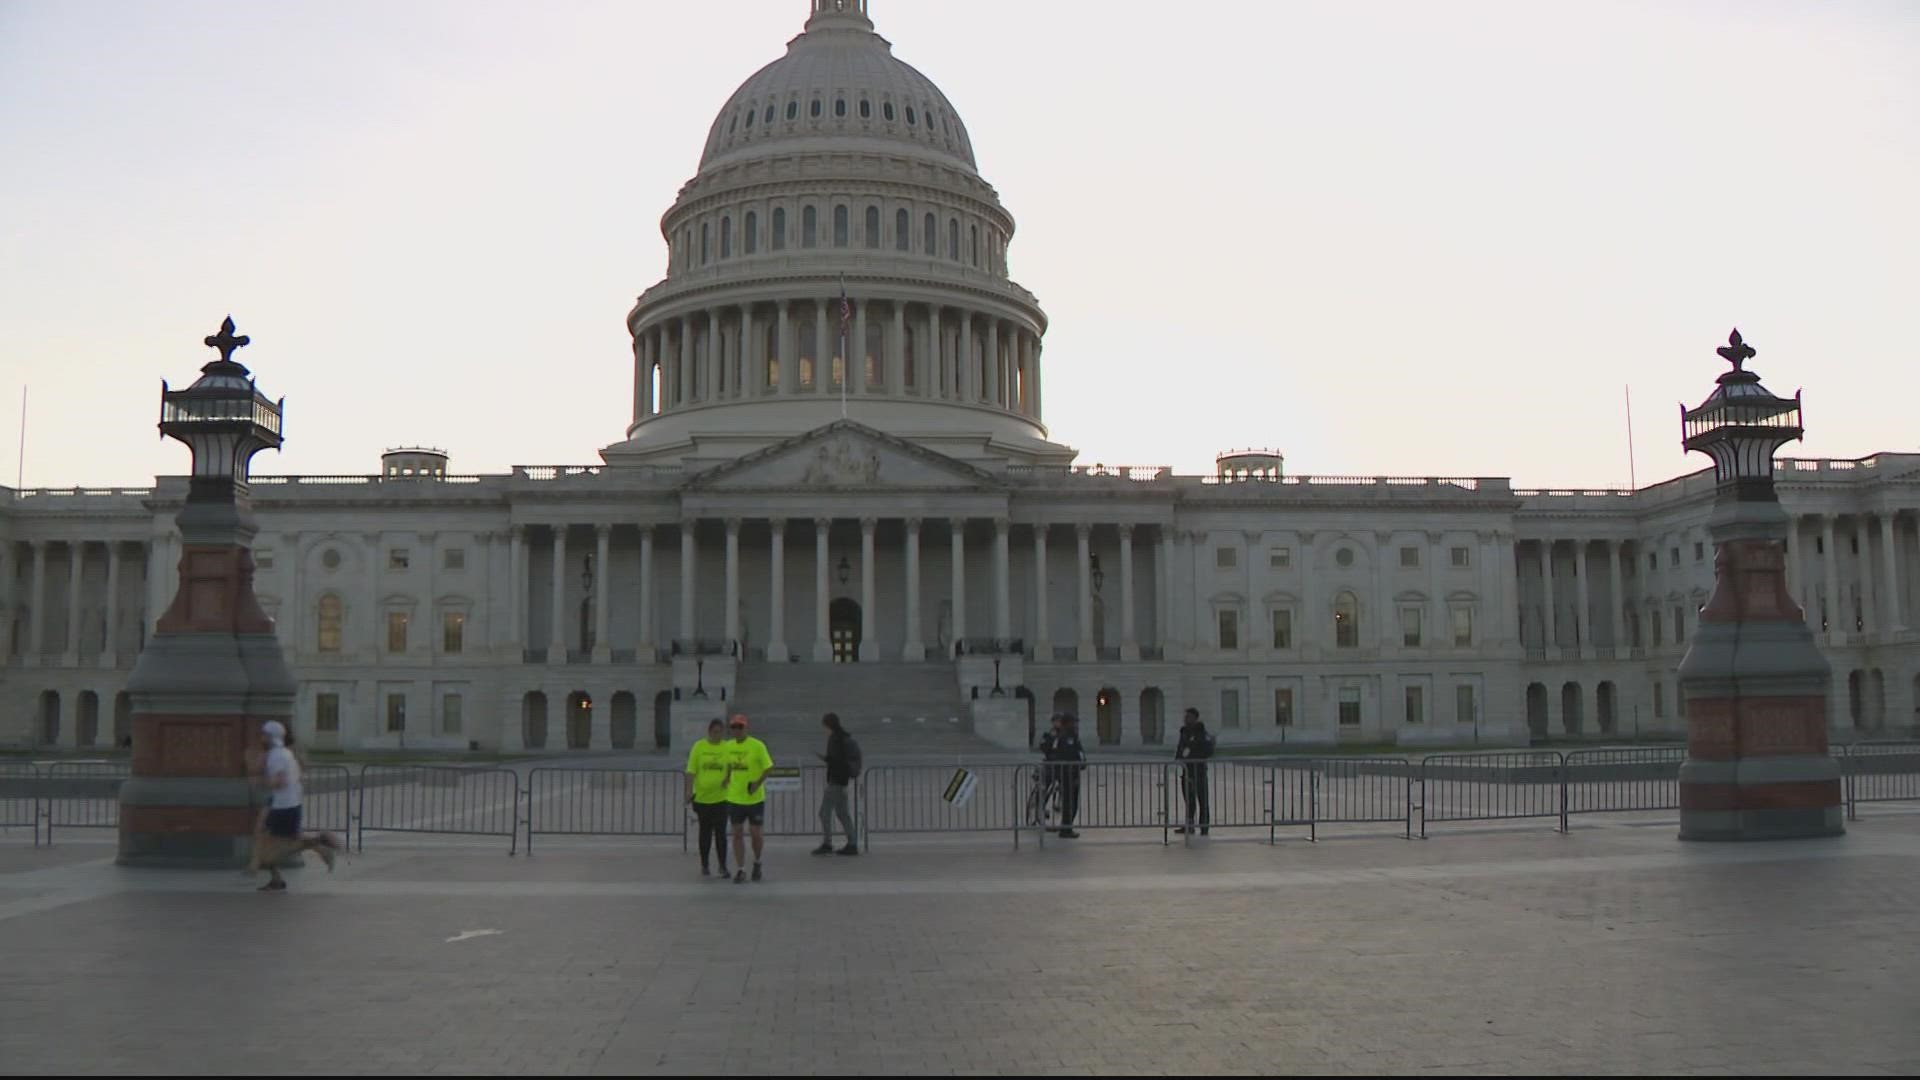 According to the DC police, a plane used for a parachute landing for the start of the Nationals game triggered the US Capitol Police to send the evacuation alert.